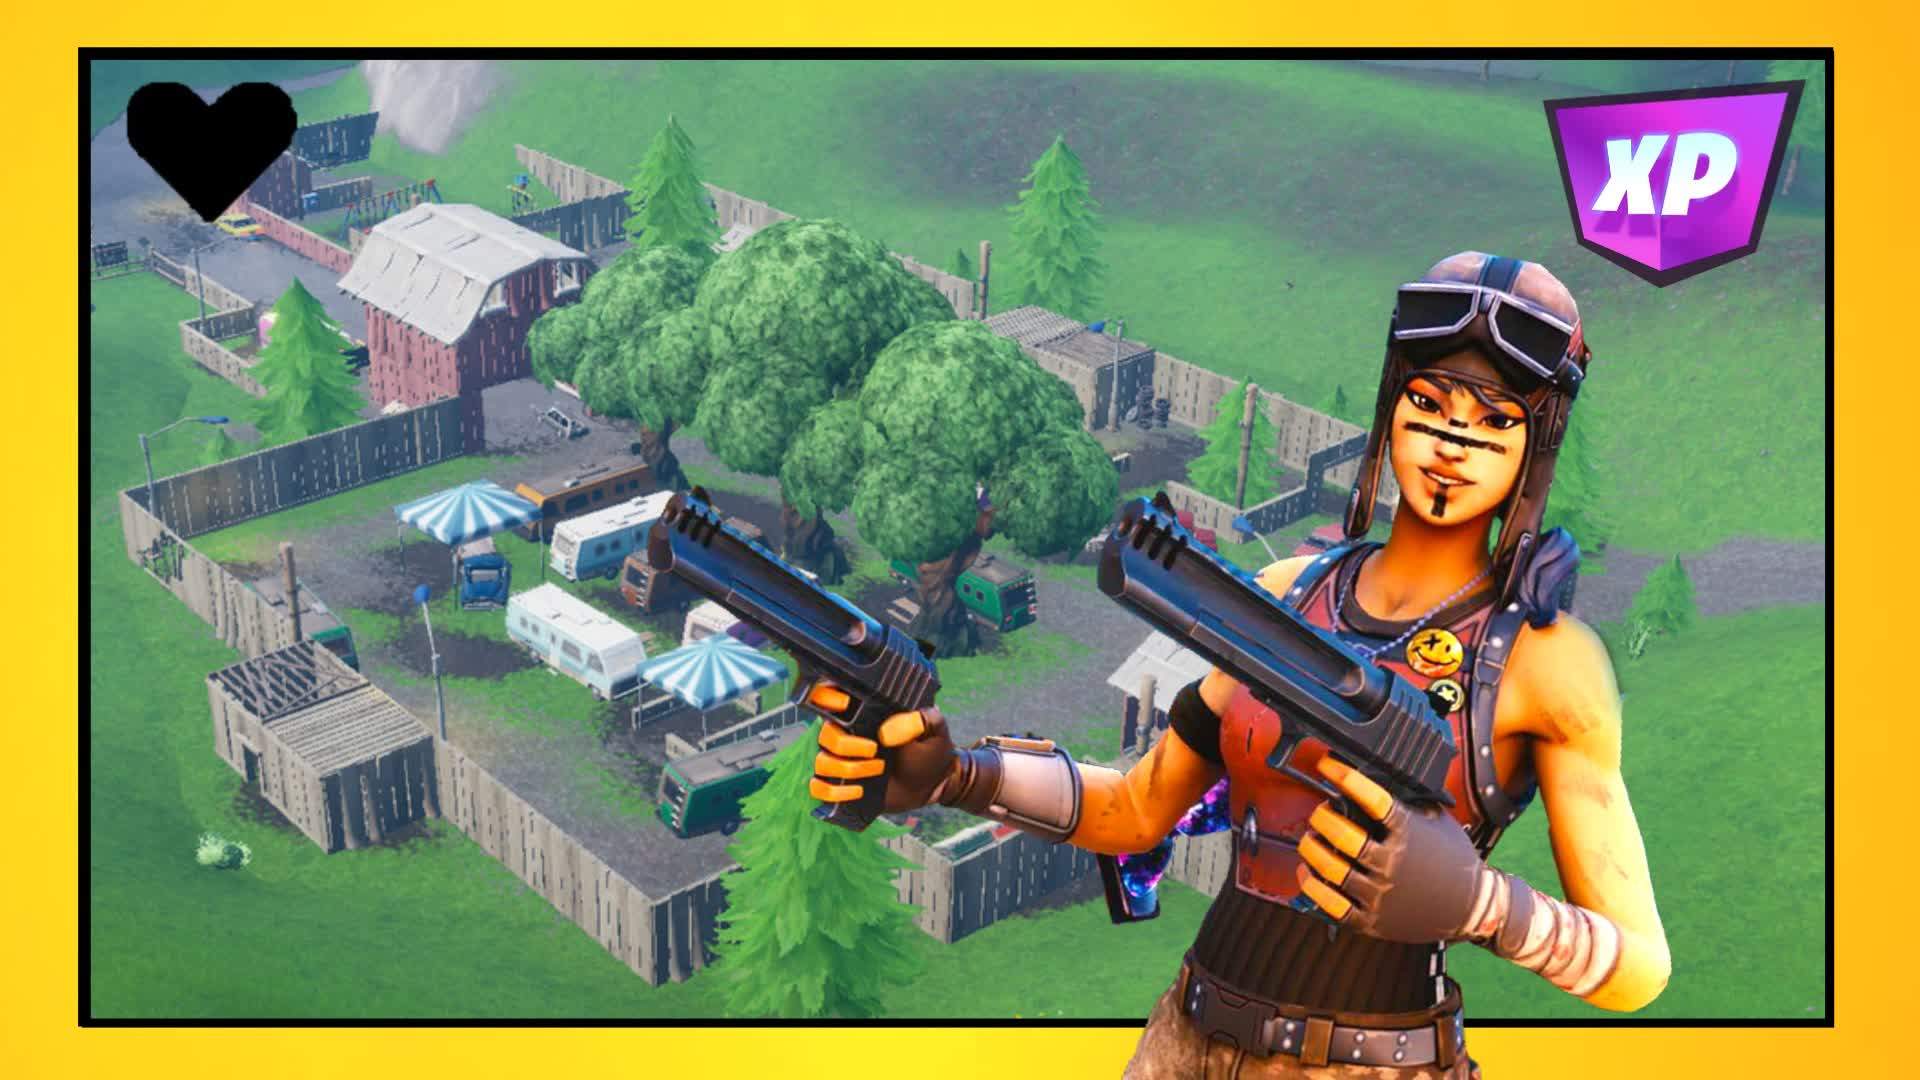 Bed Wars (Mythic Weapons & XP) 👑 [ Candook ] – Fortnite Creative